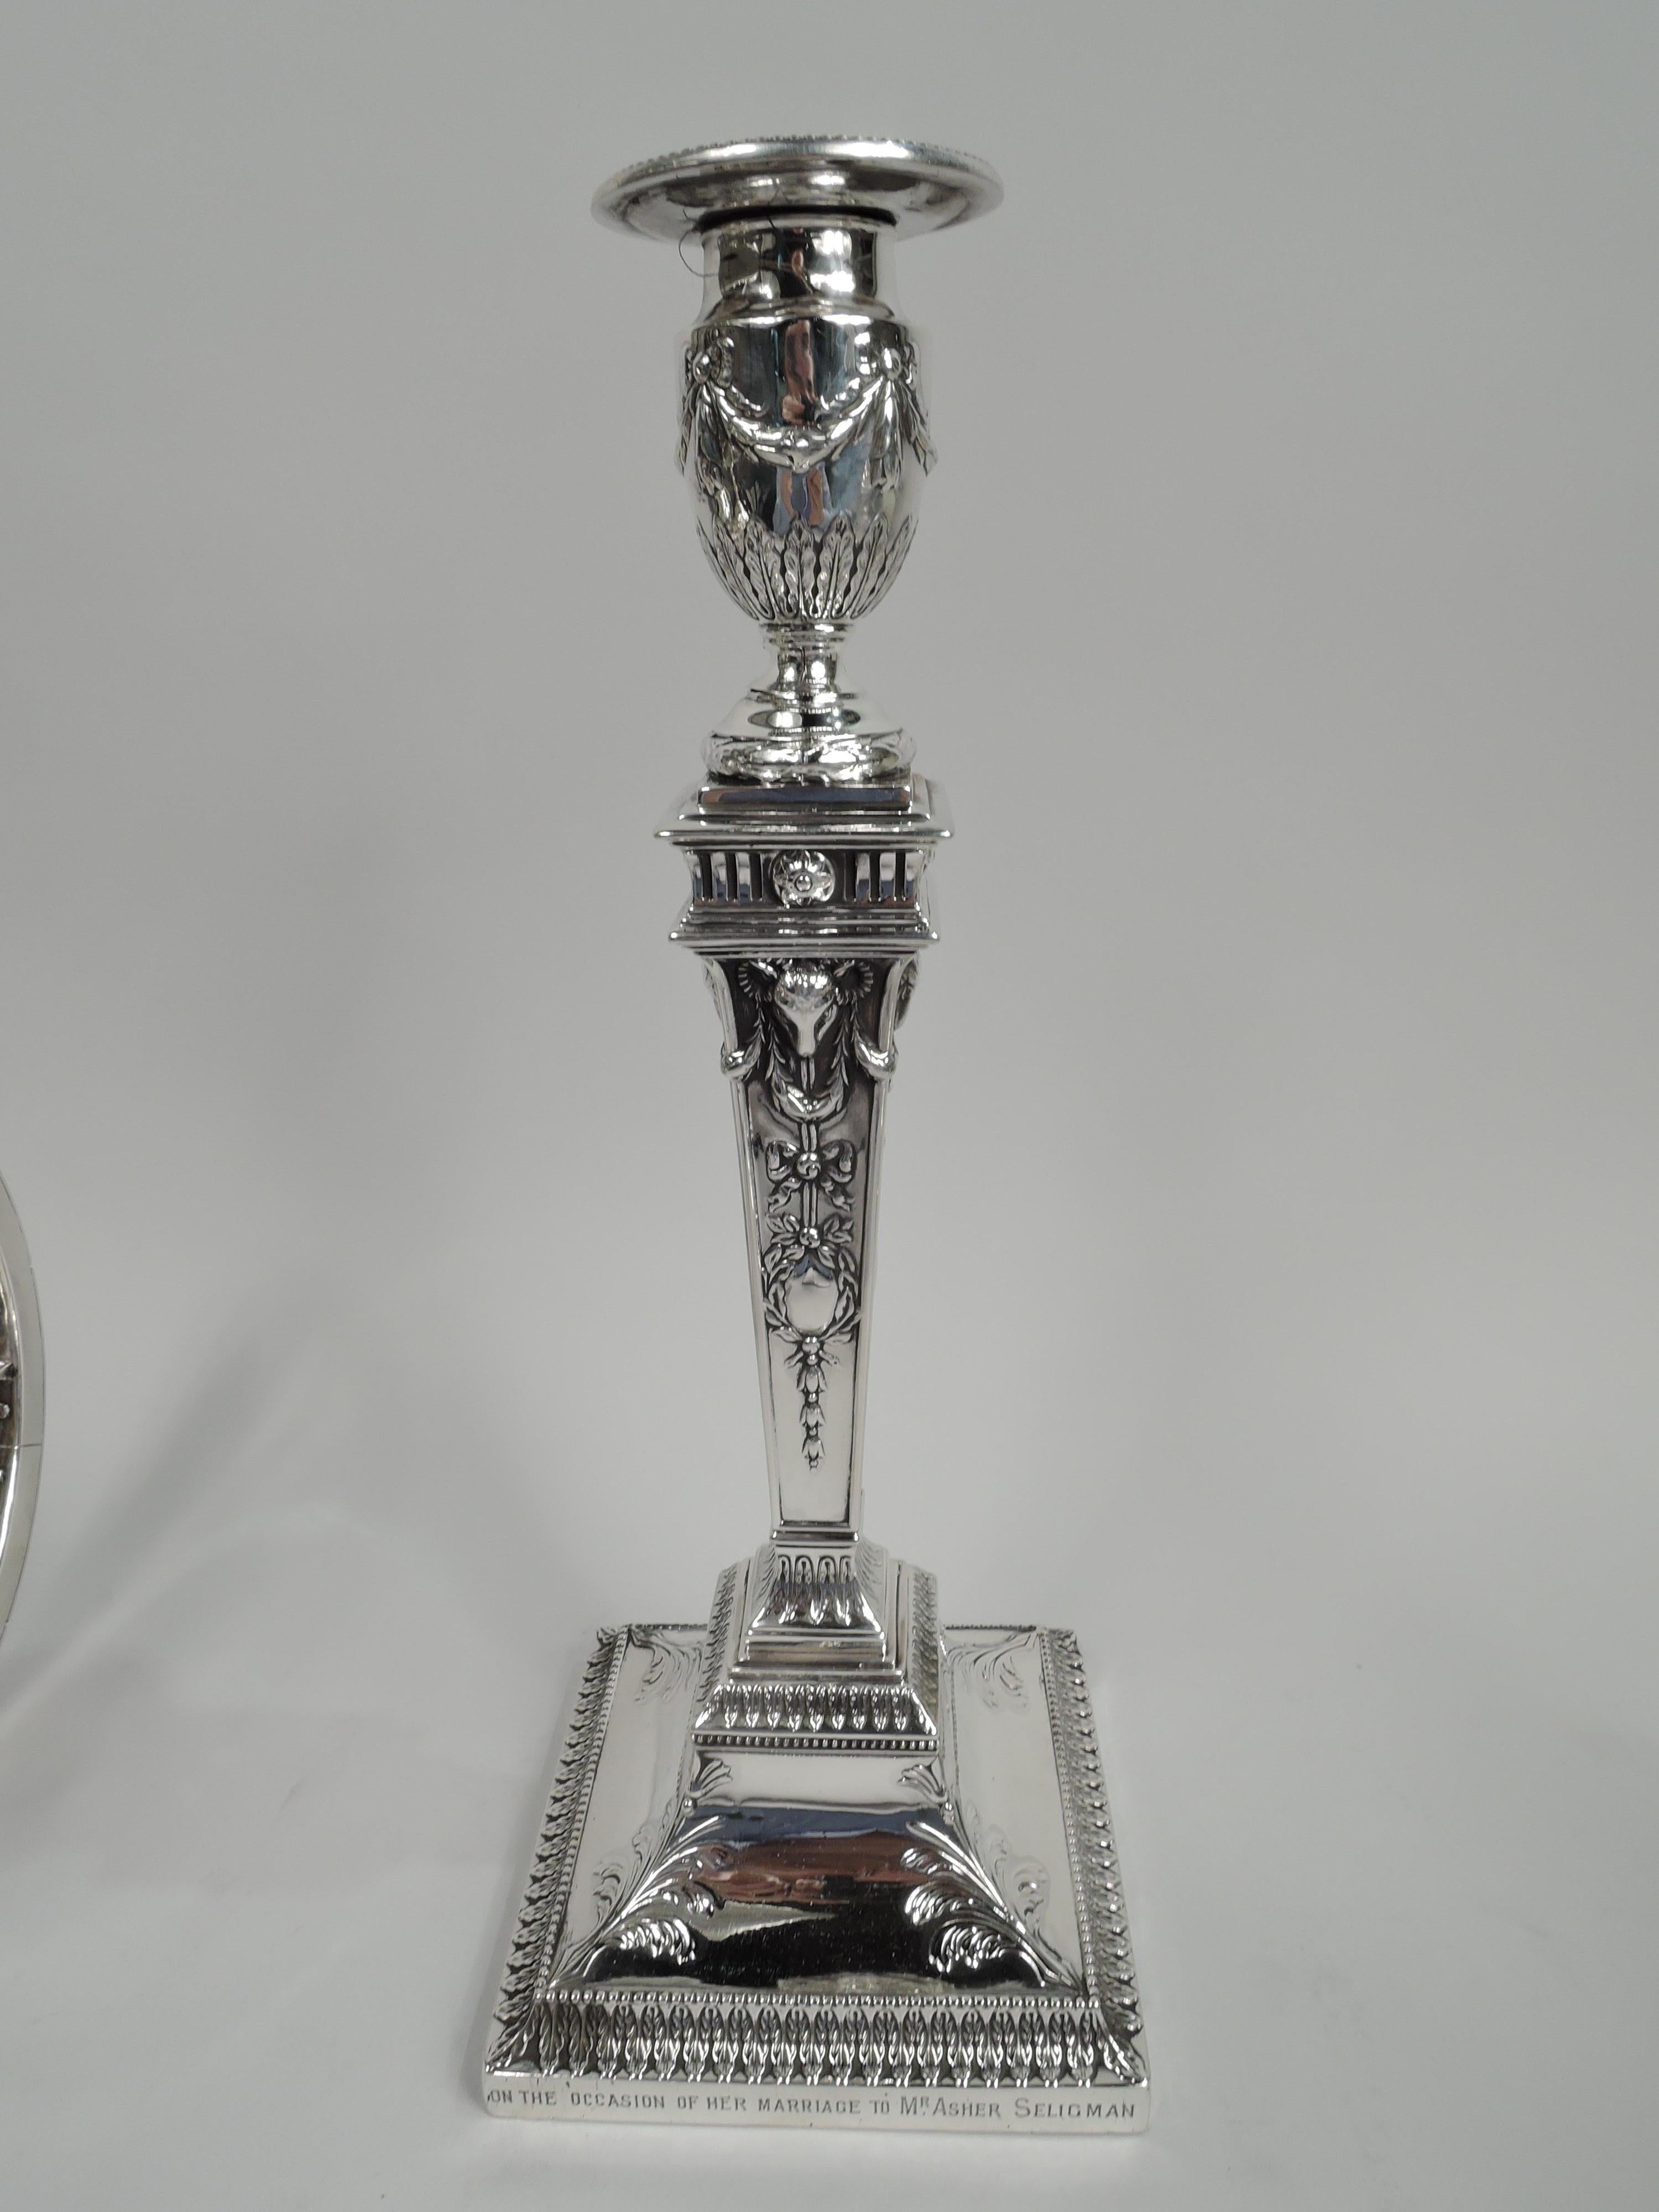 Pair of Victorian neoclassical sterling silver candlesticks. Made by Hawksworth, Eyre & Co., Ltd in Sheffield in 1880-1. Each: Urn socket on domed foot mounted to tapering pillar on raised square foot. Beading, leaf-and-dart, swags, and ram’s heads.